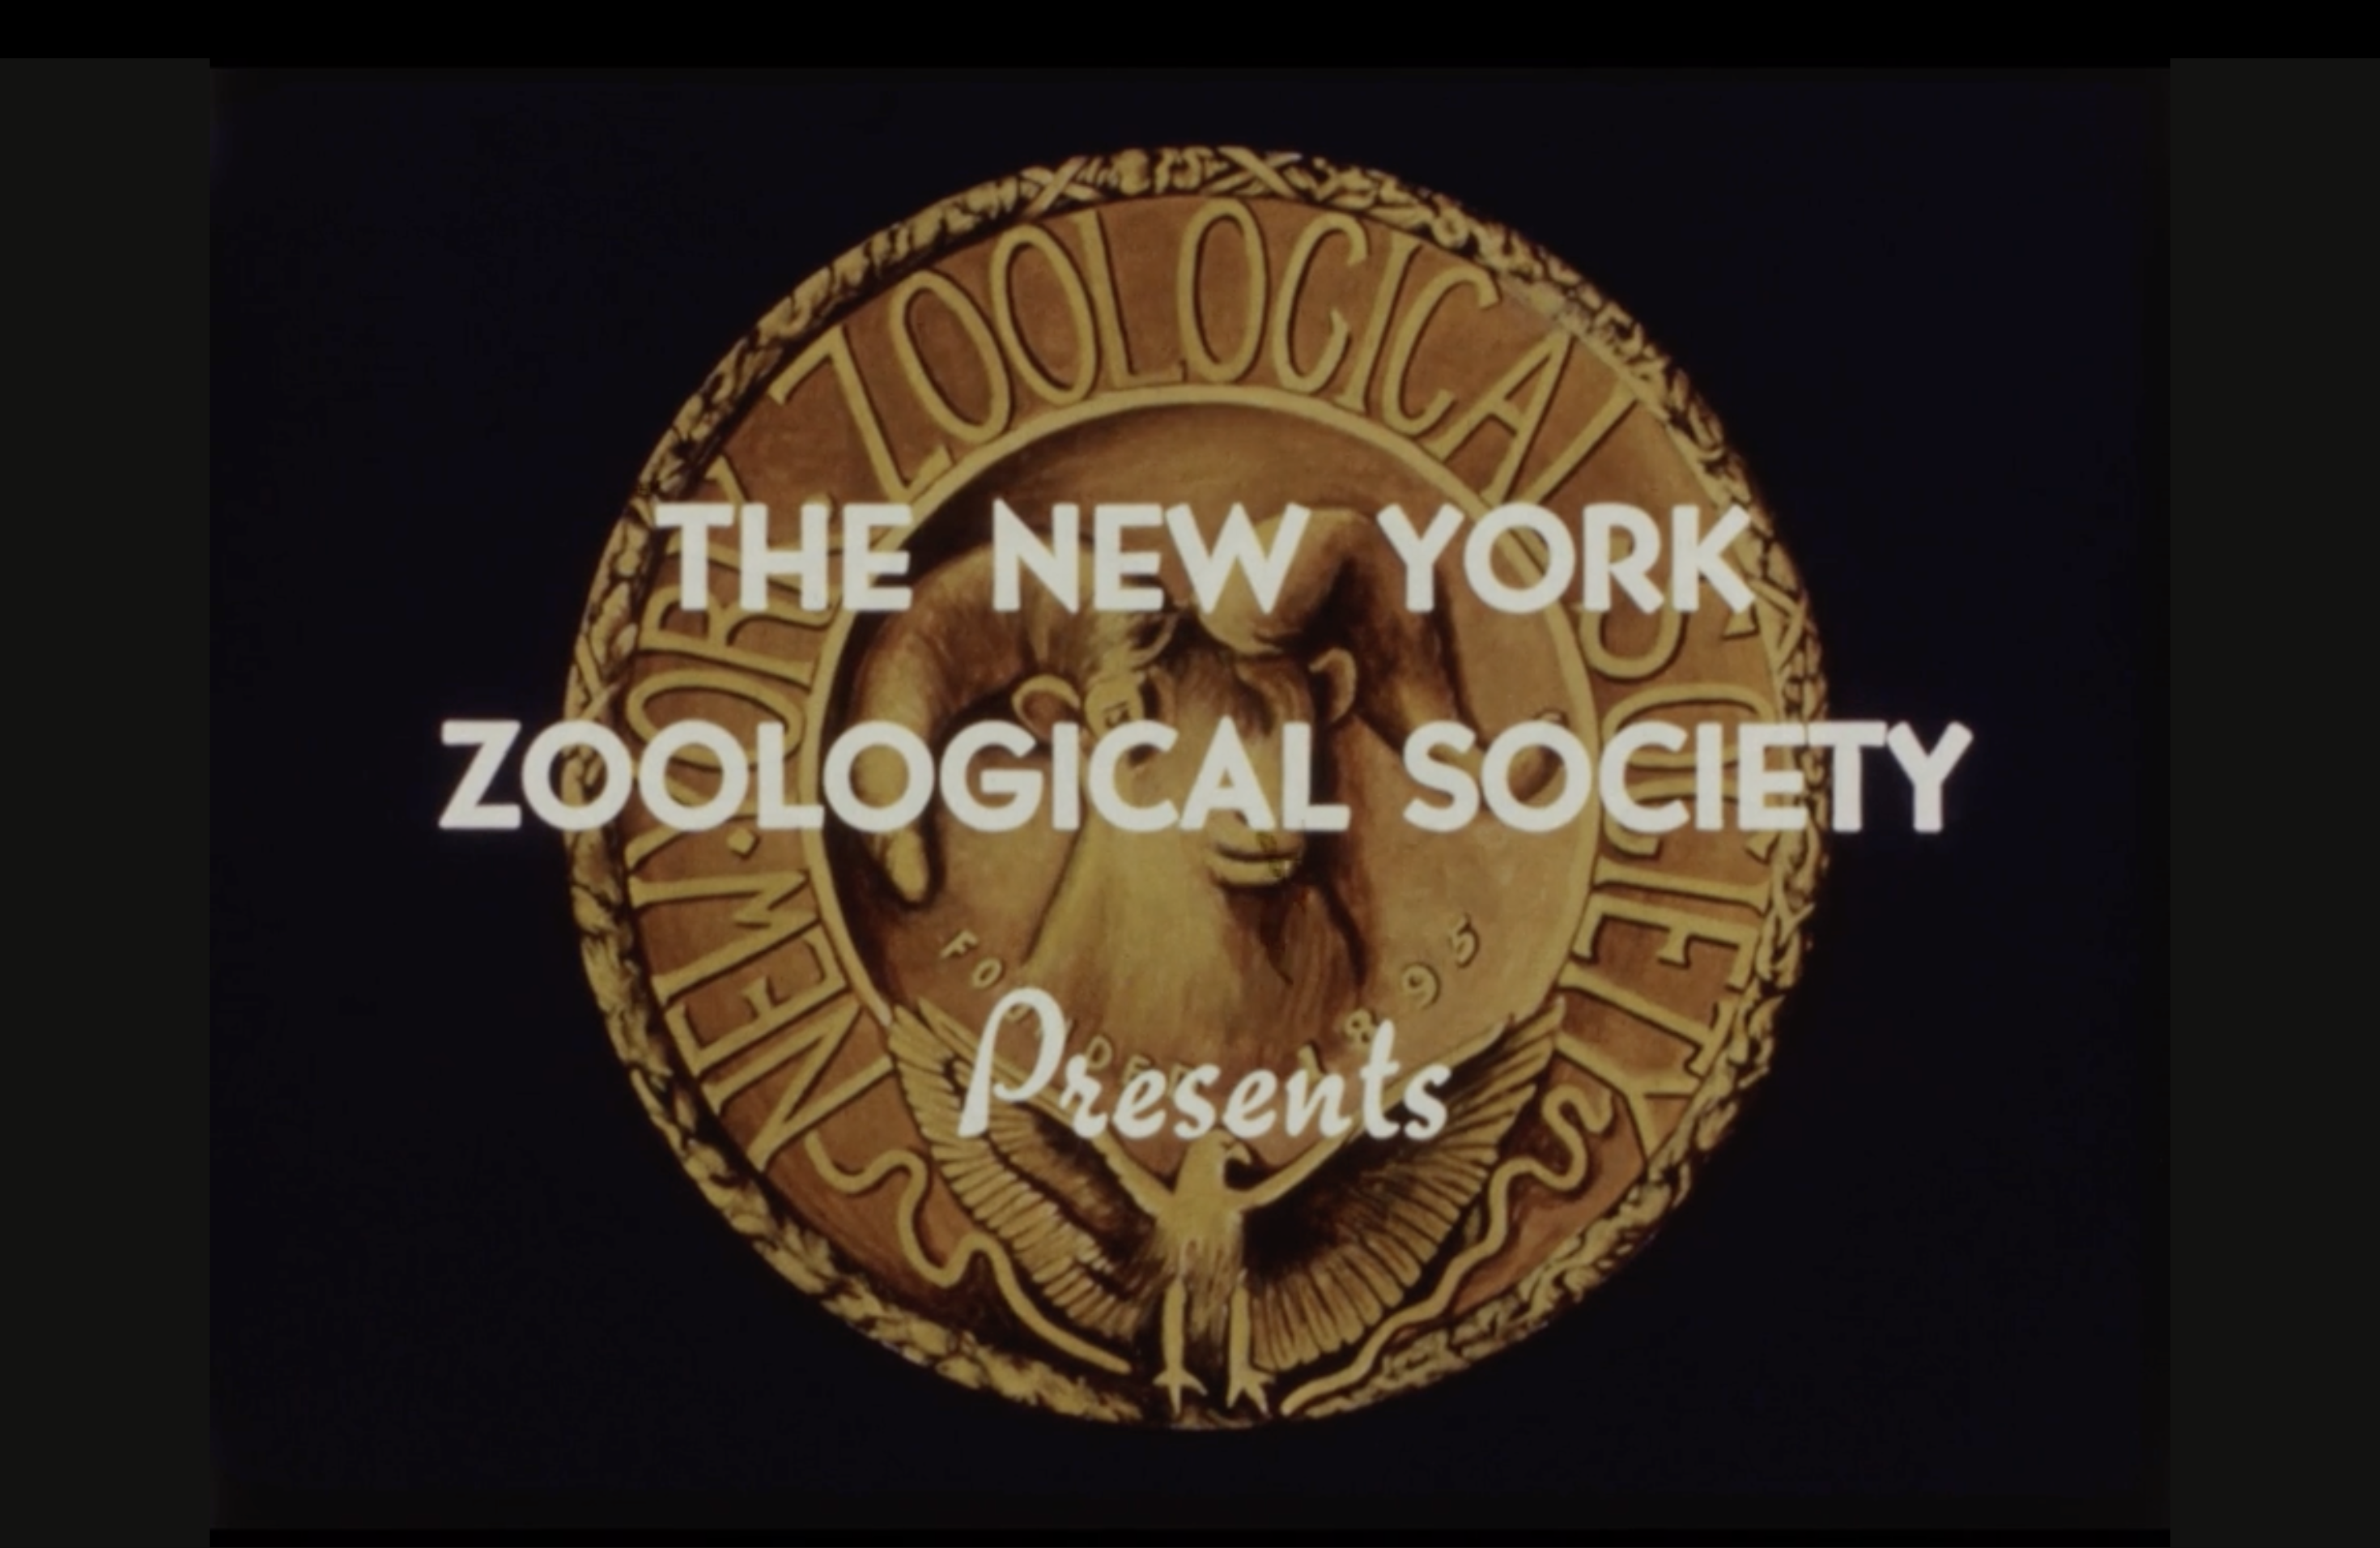 The New York Zoological Society Presents film title card